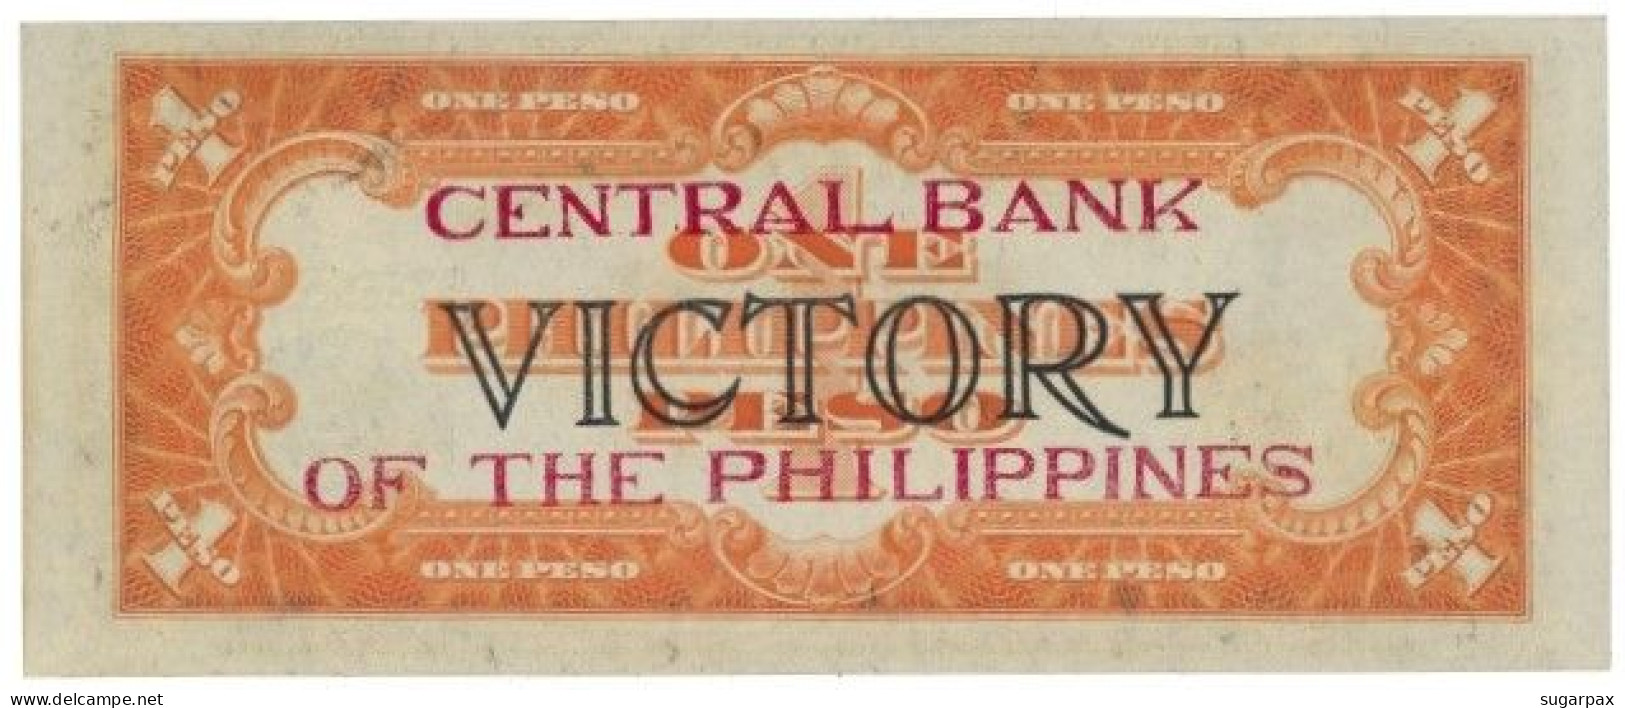 Philippines - 1 Peso - ND ( 1949 ) - Pick 117 - AUNC. - Serie VICTORY With RED Overprint CENTRAL BANK OF PHILIPPINES - Filippijnen